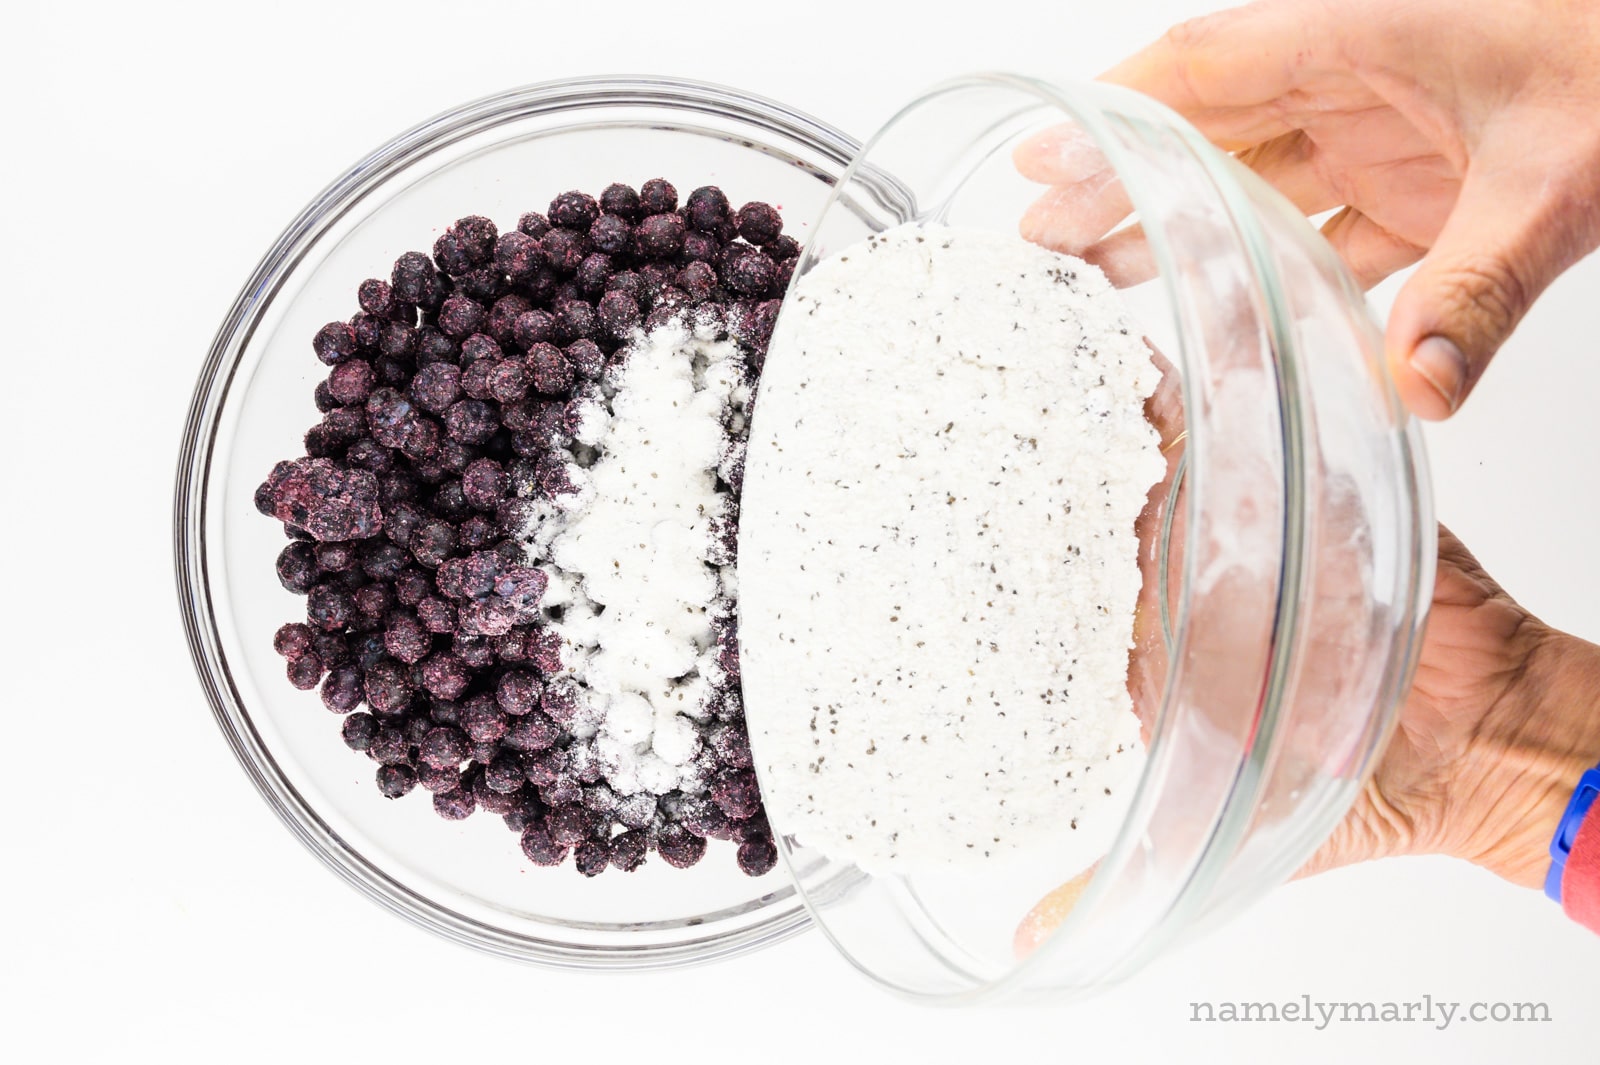 Two hands hold a bowl of flour mixture, pouring it in with a bowl of frozen blueberries.